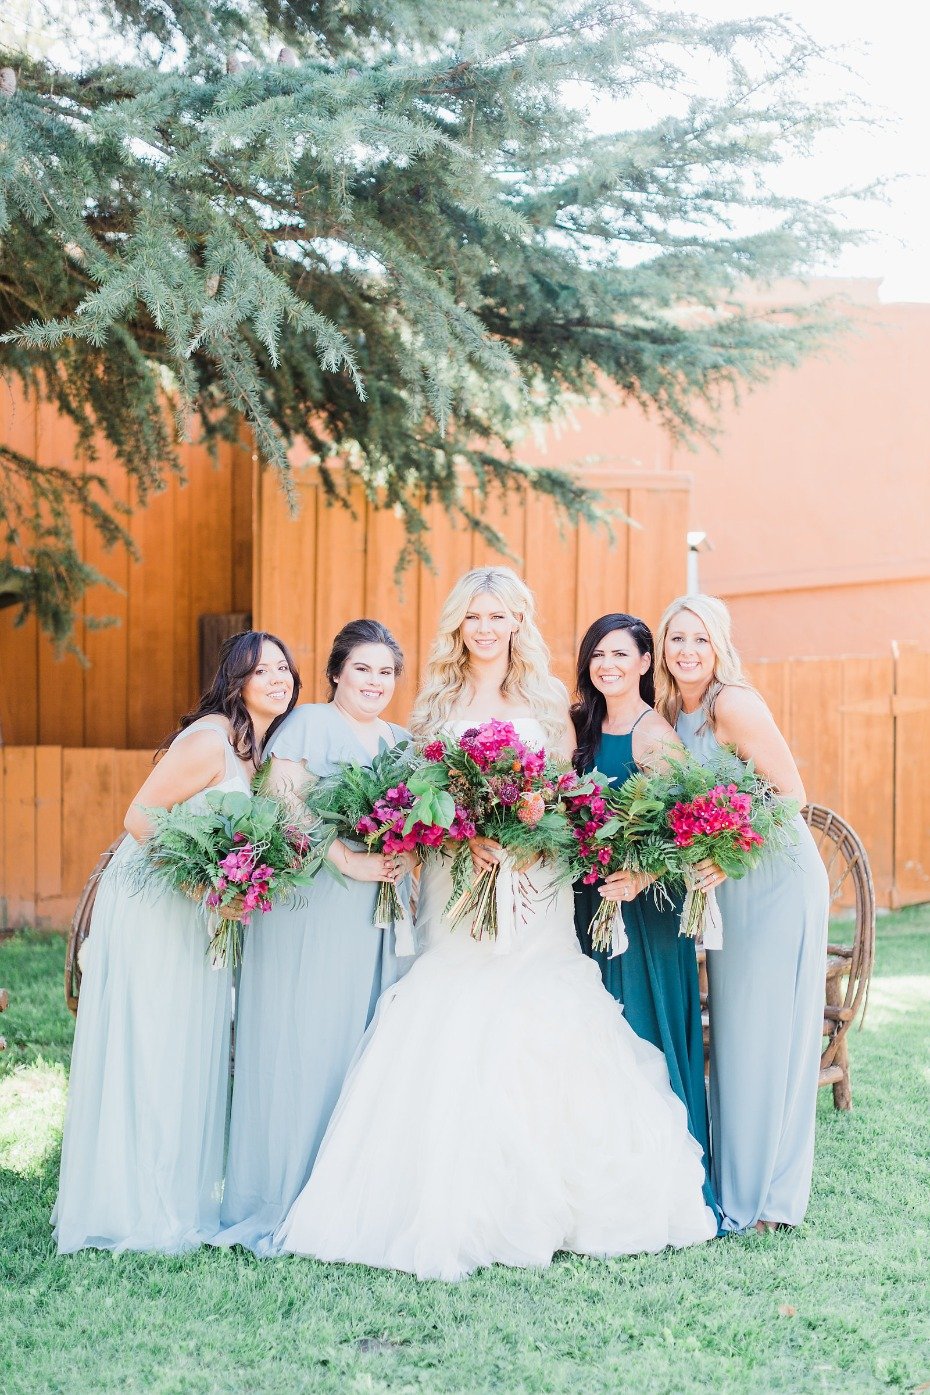 Mismatched bridesmaid dresses in blue